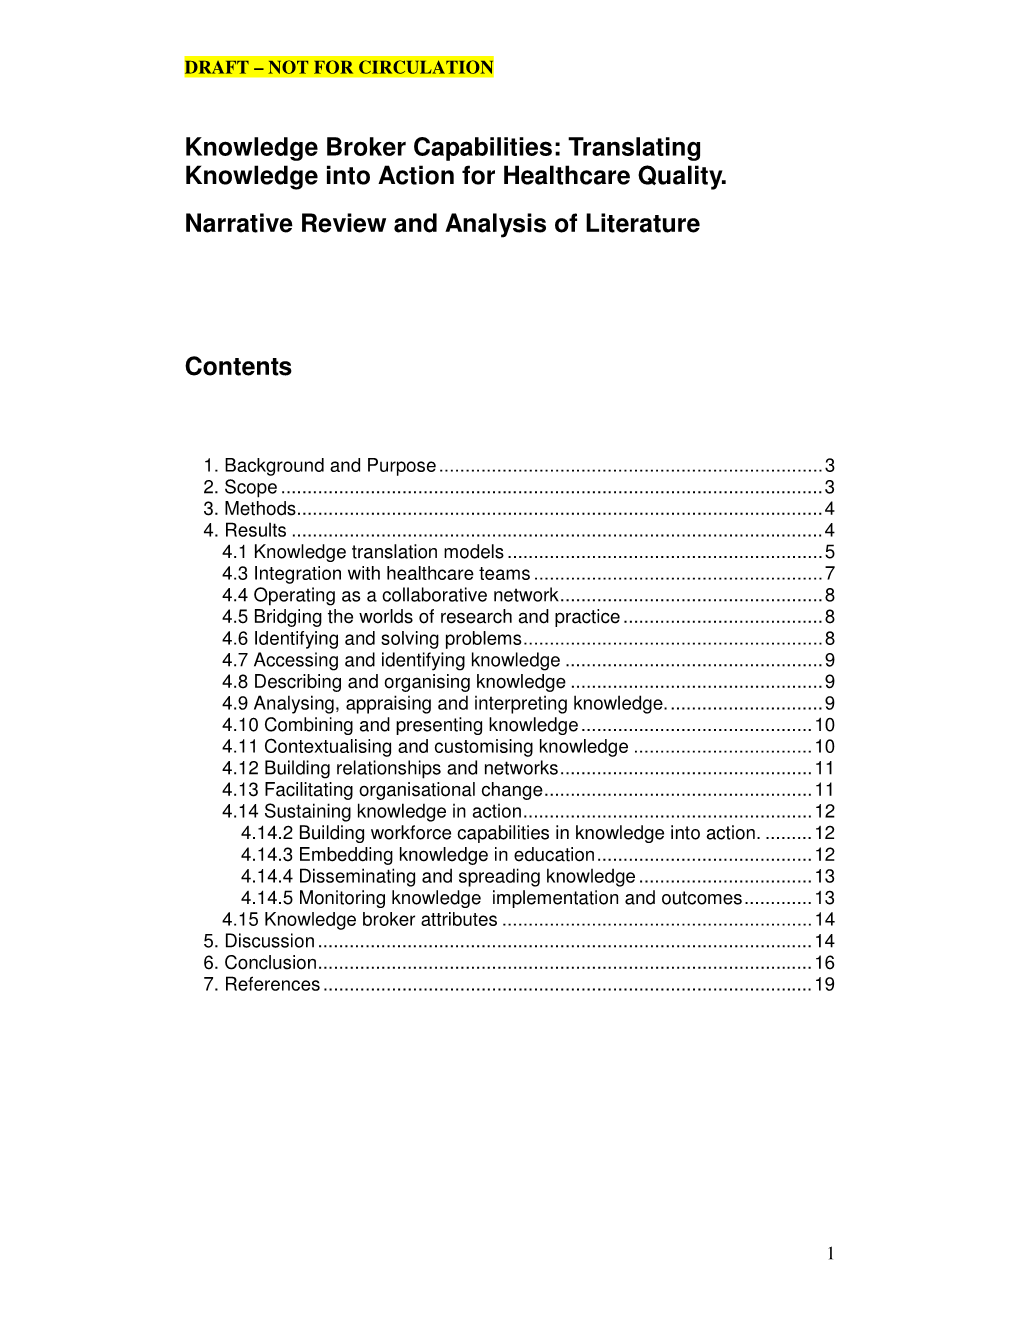 Knowledge Broker Capabilities: Translating Knowledge Into Action for Healthcare Quality